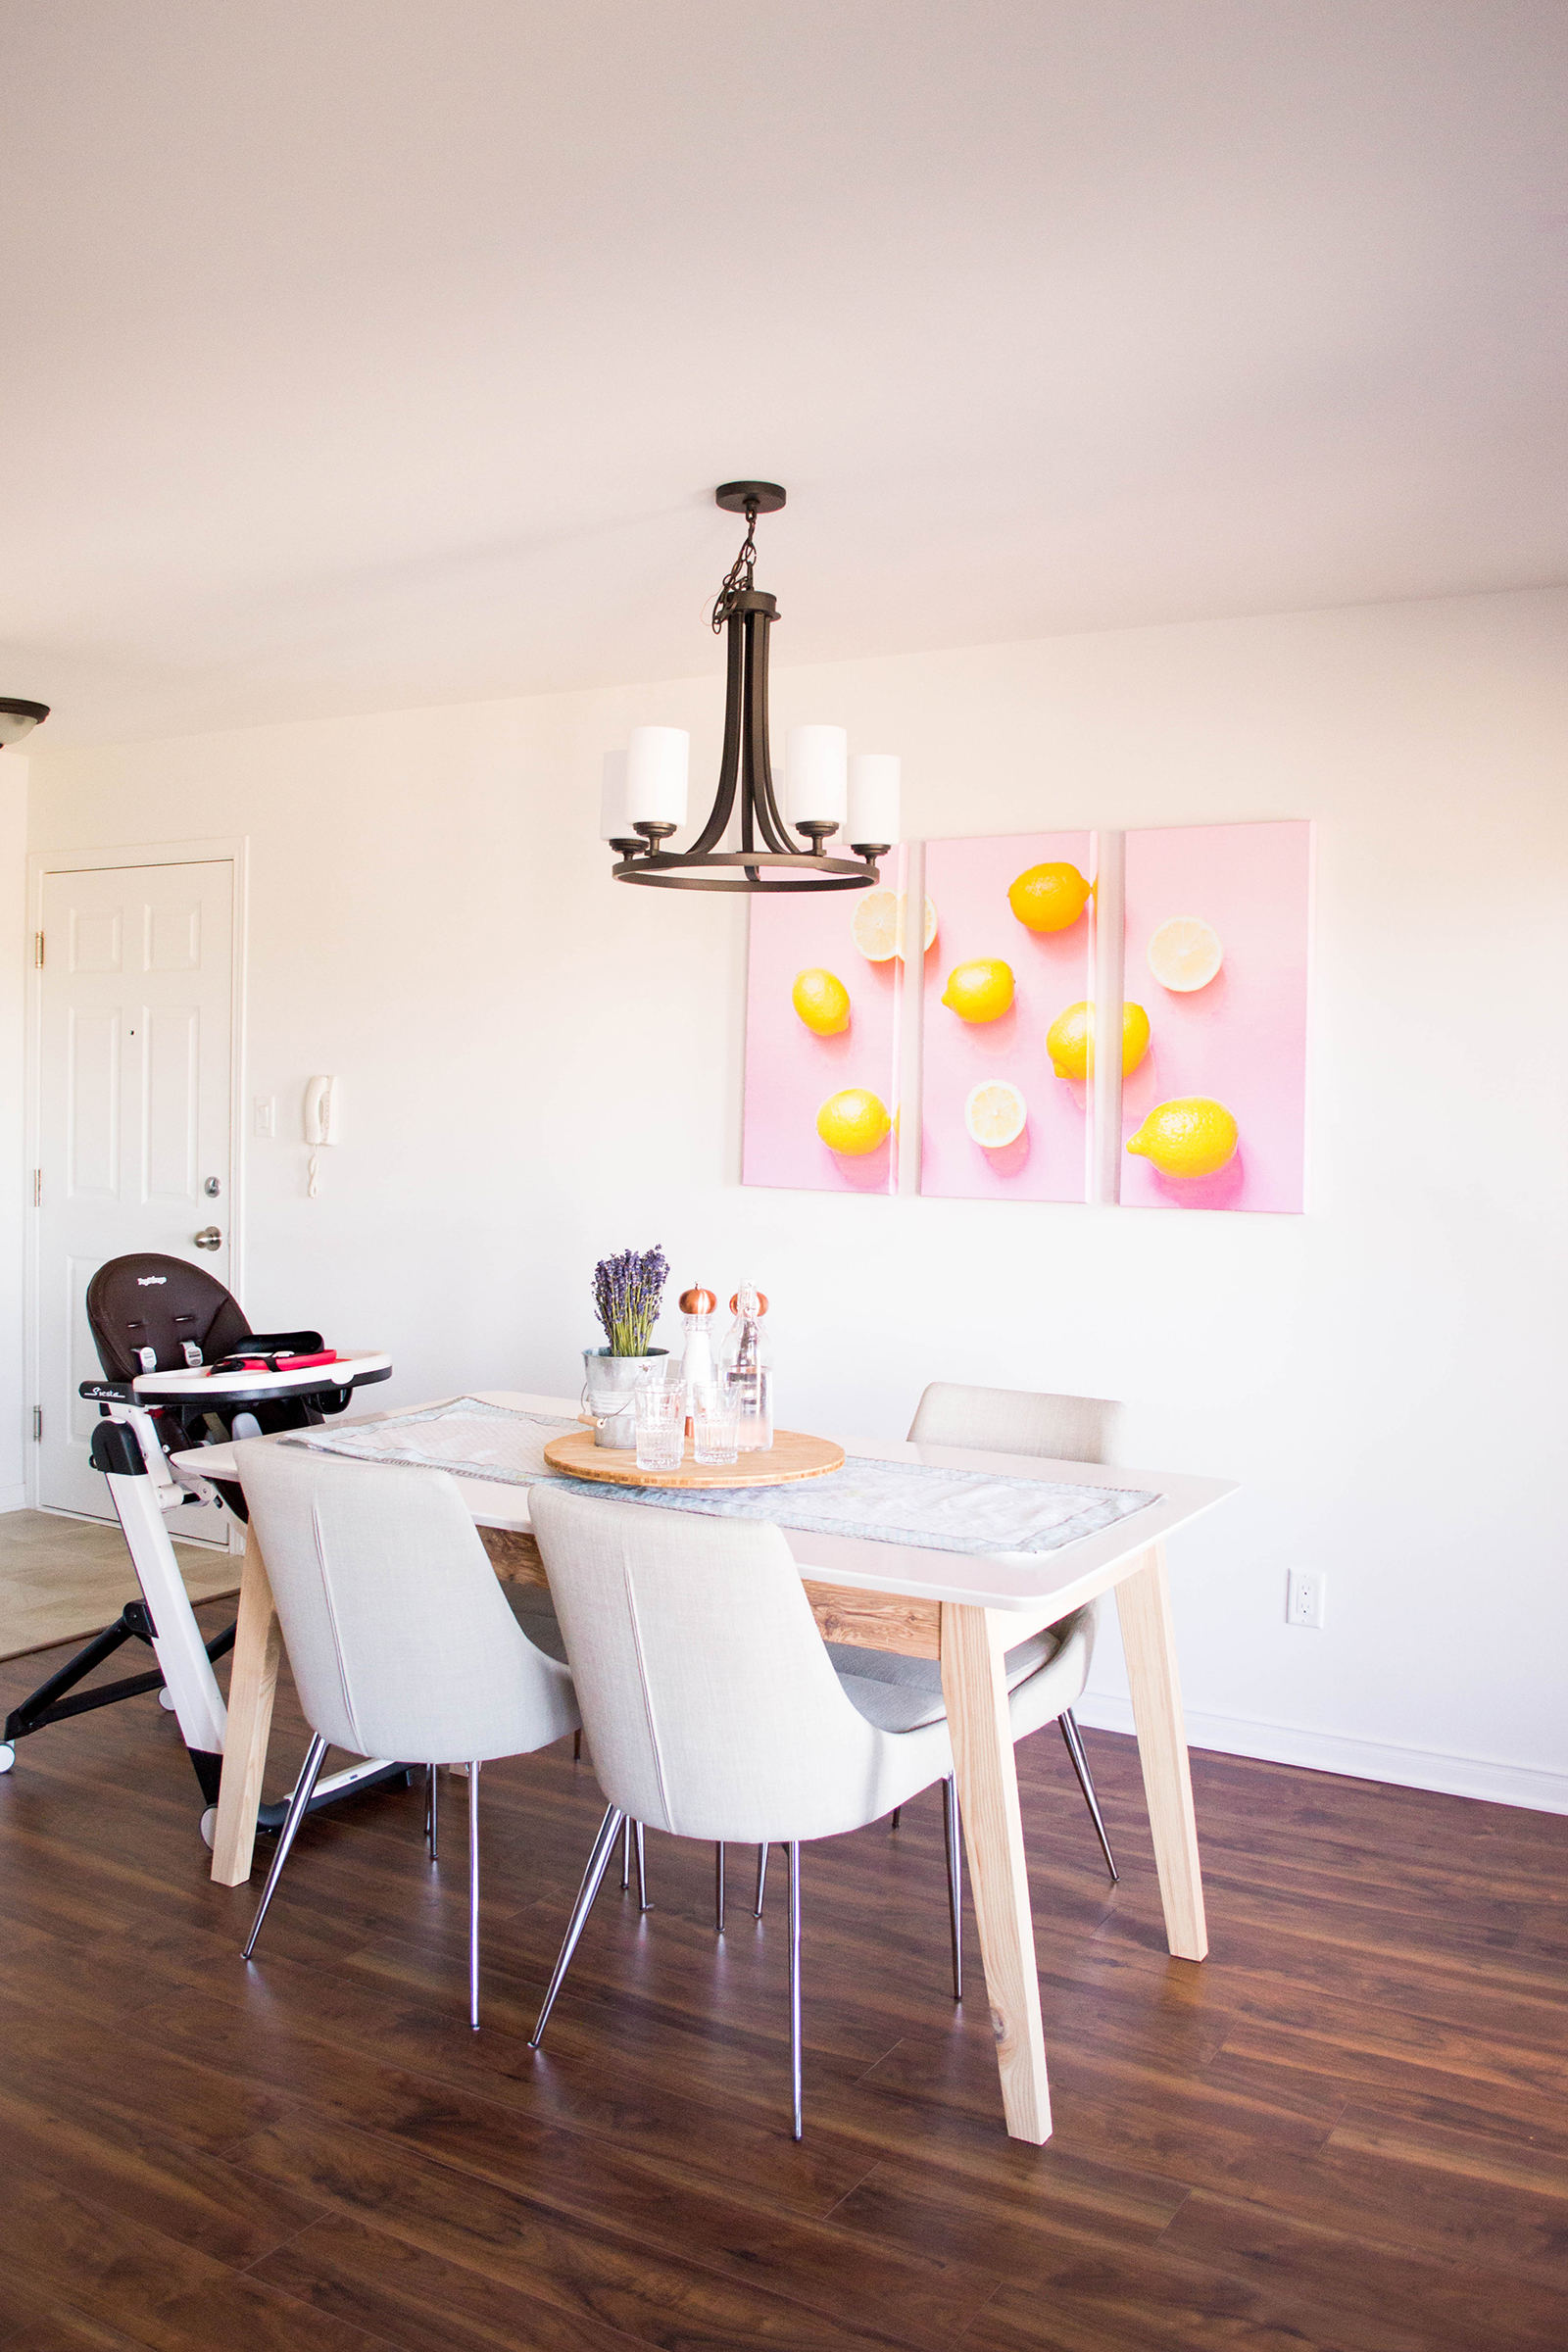 Staying Stylish and Keeping it Kid-Friendly: Our Dining Room Reveal